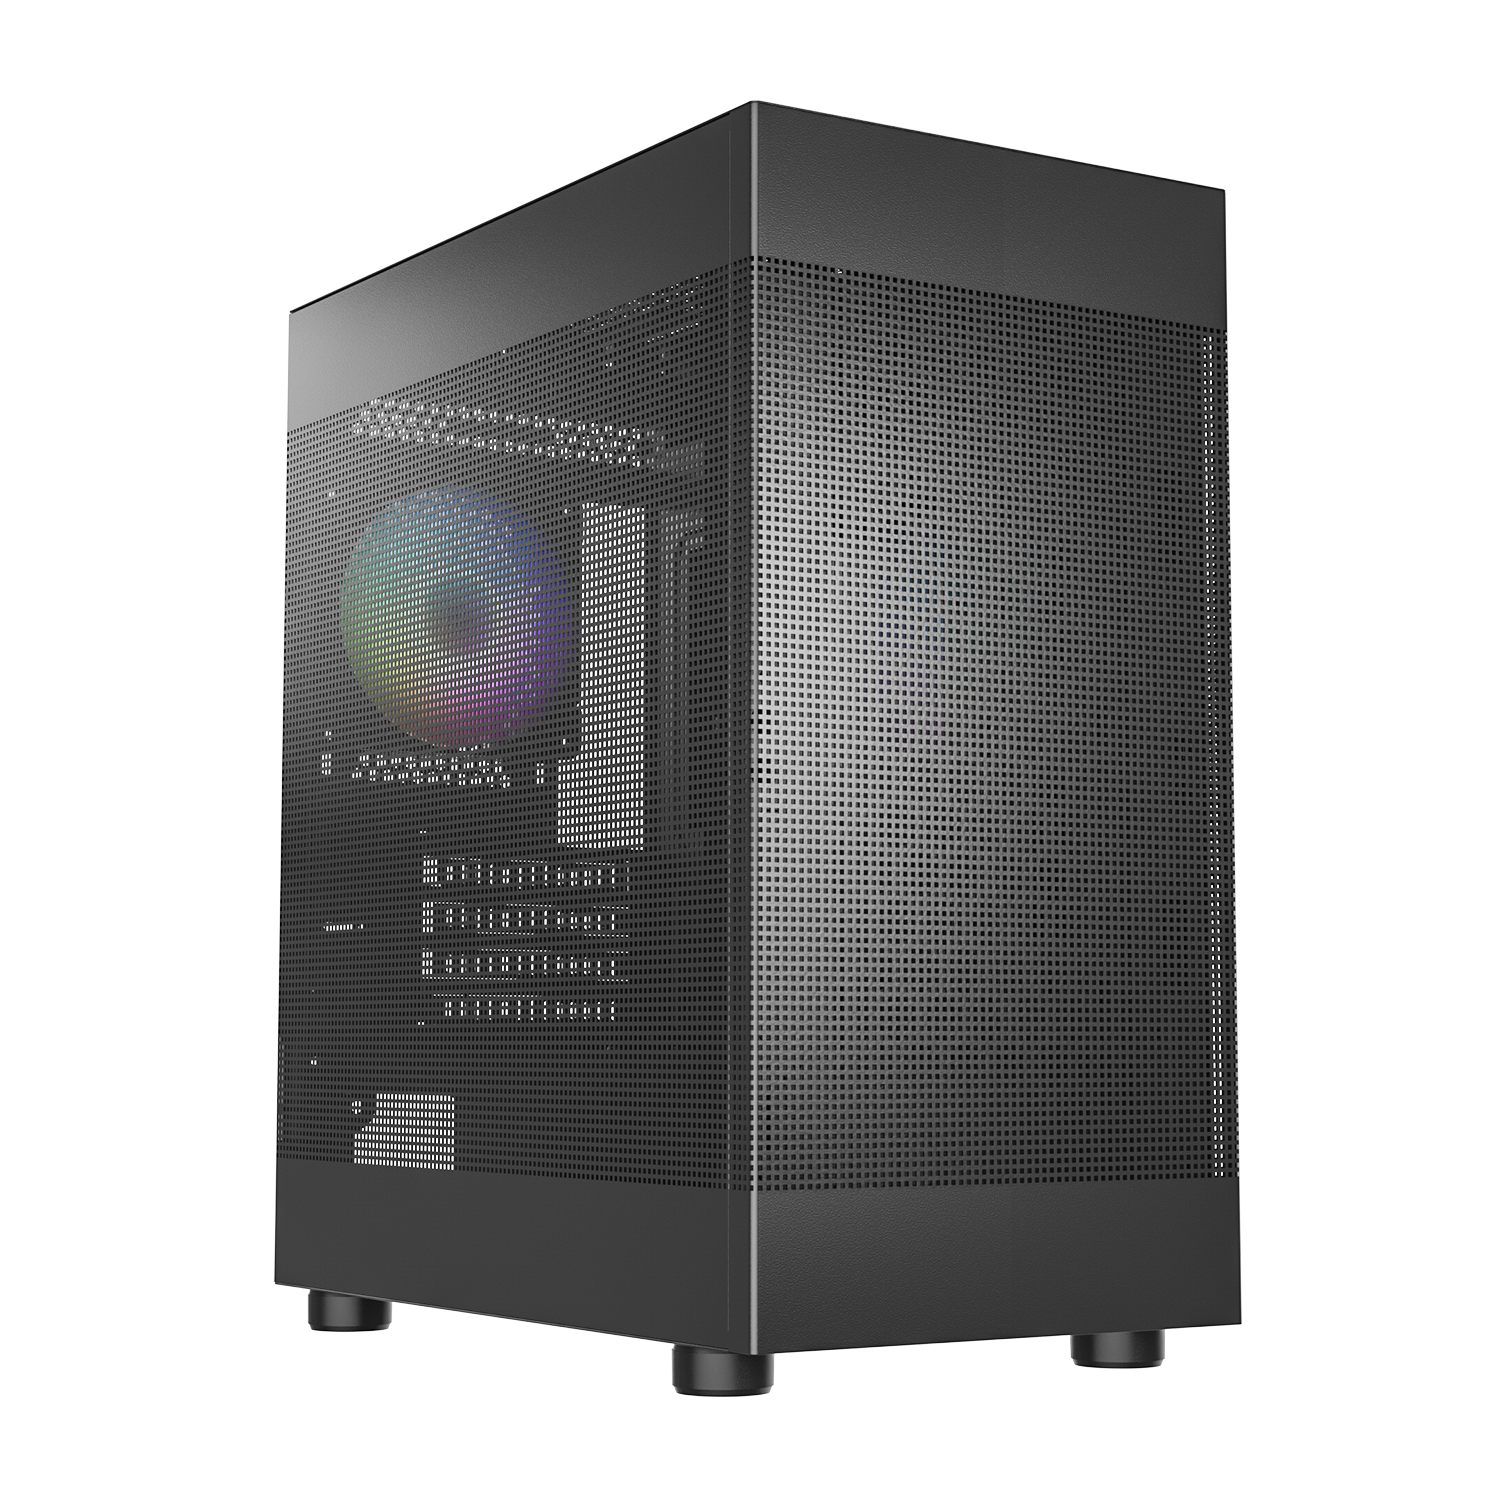 DARKROCK MH200 Micro ATX Gaming PC Computer Case Mid-Tower